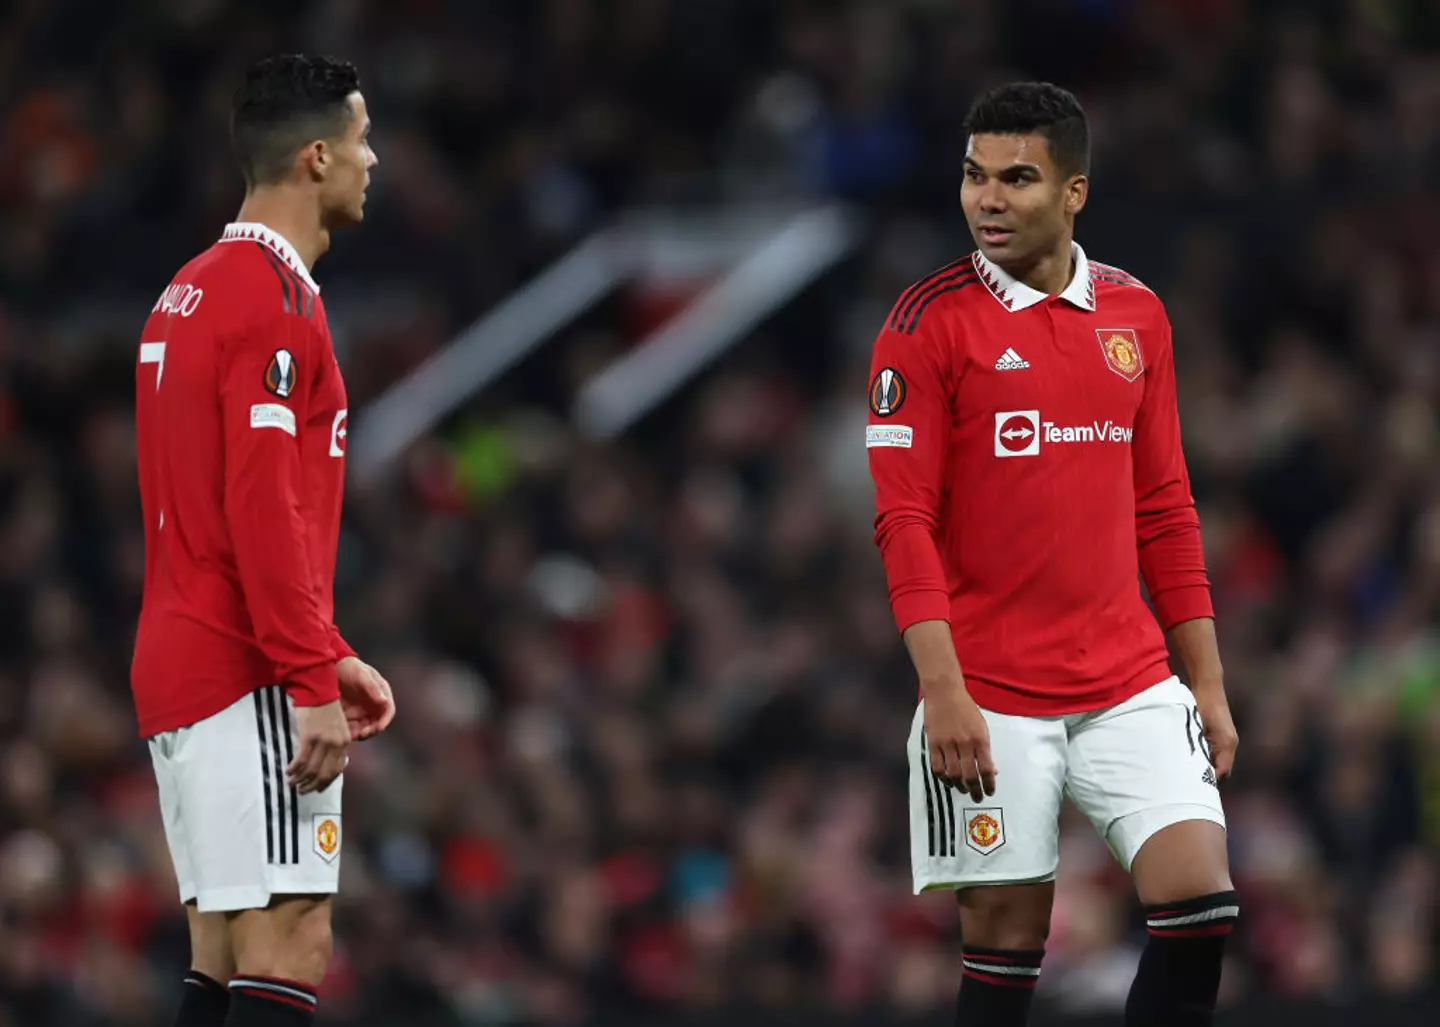 Ronaldo played with Casemiro at Real Madrid and Manchester United (Image: Getty)